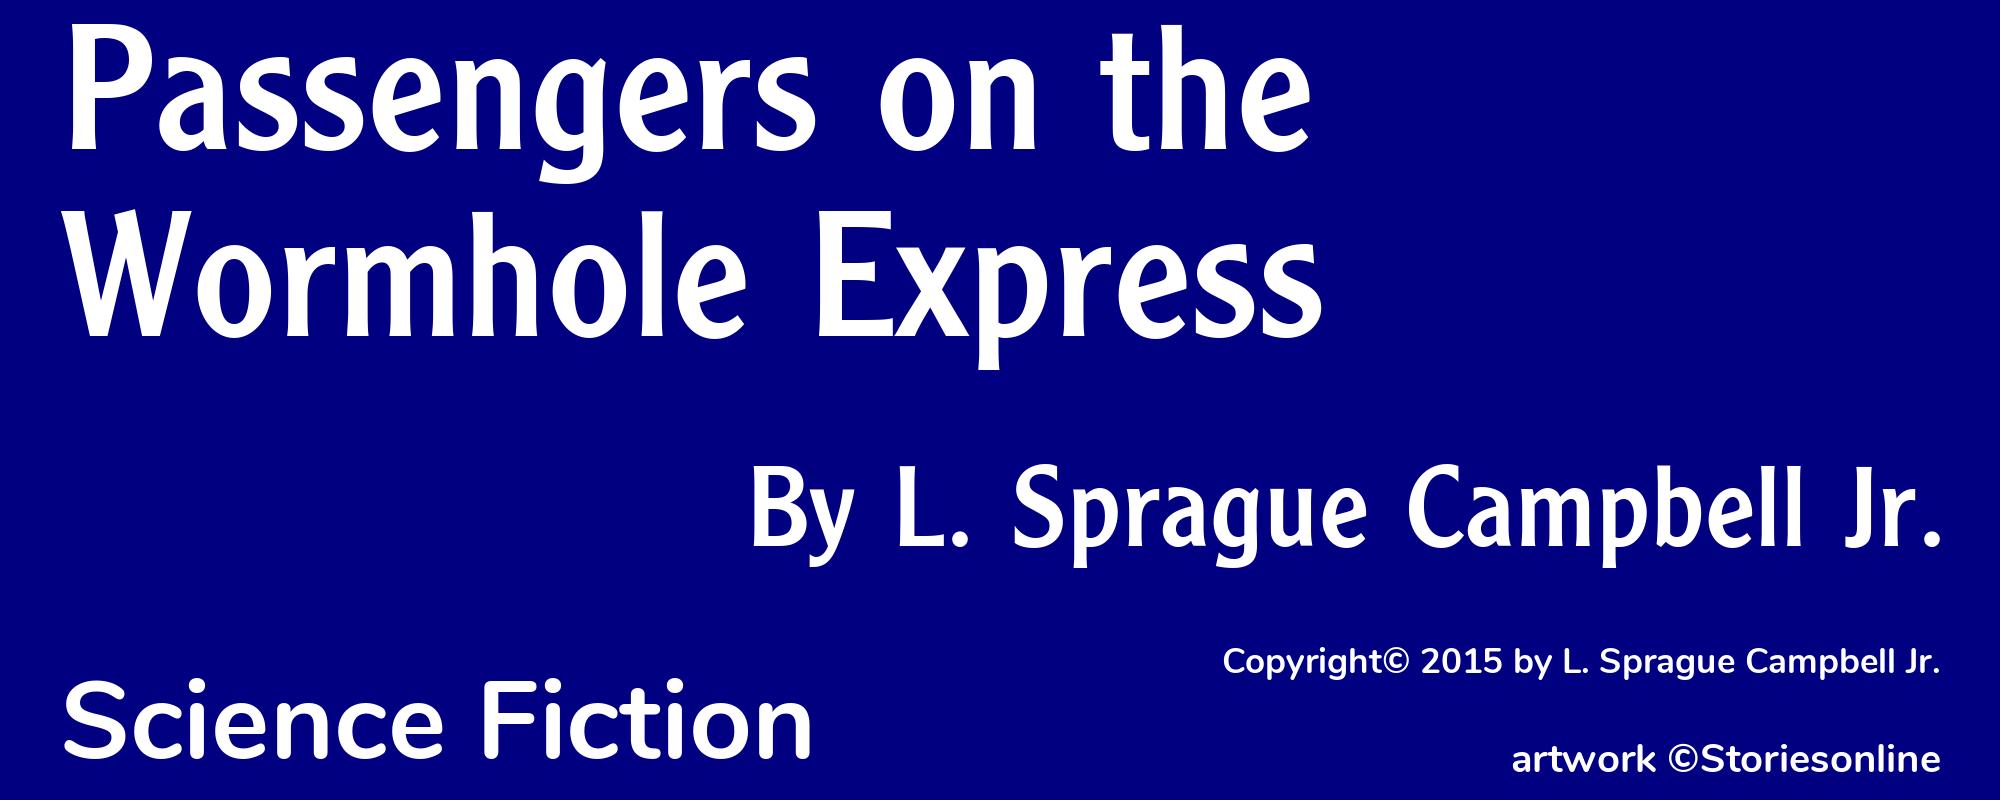 Passengers on the Wormhole Express - Cover